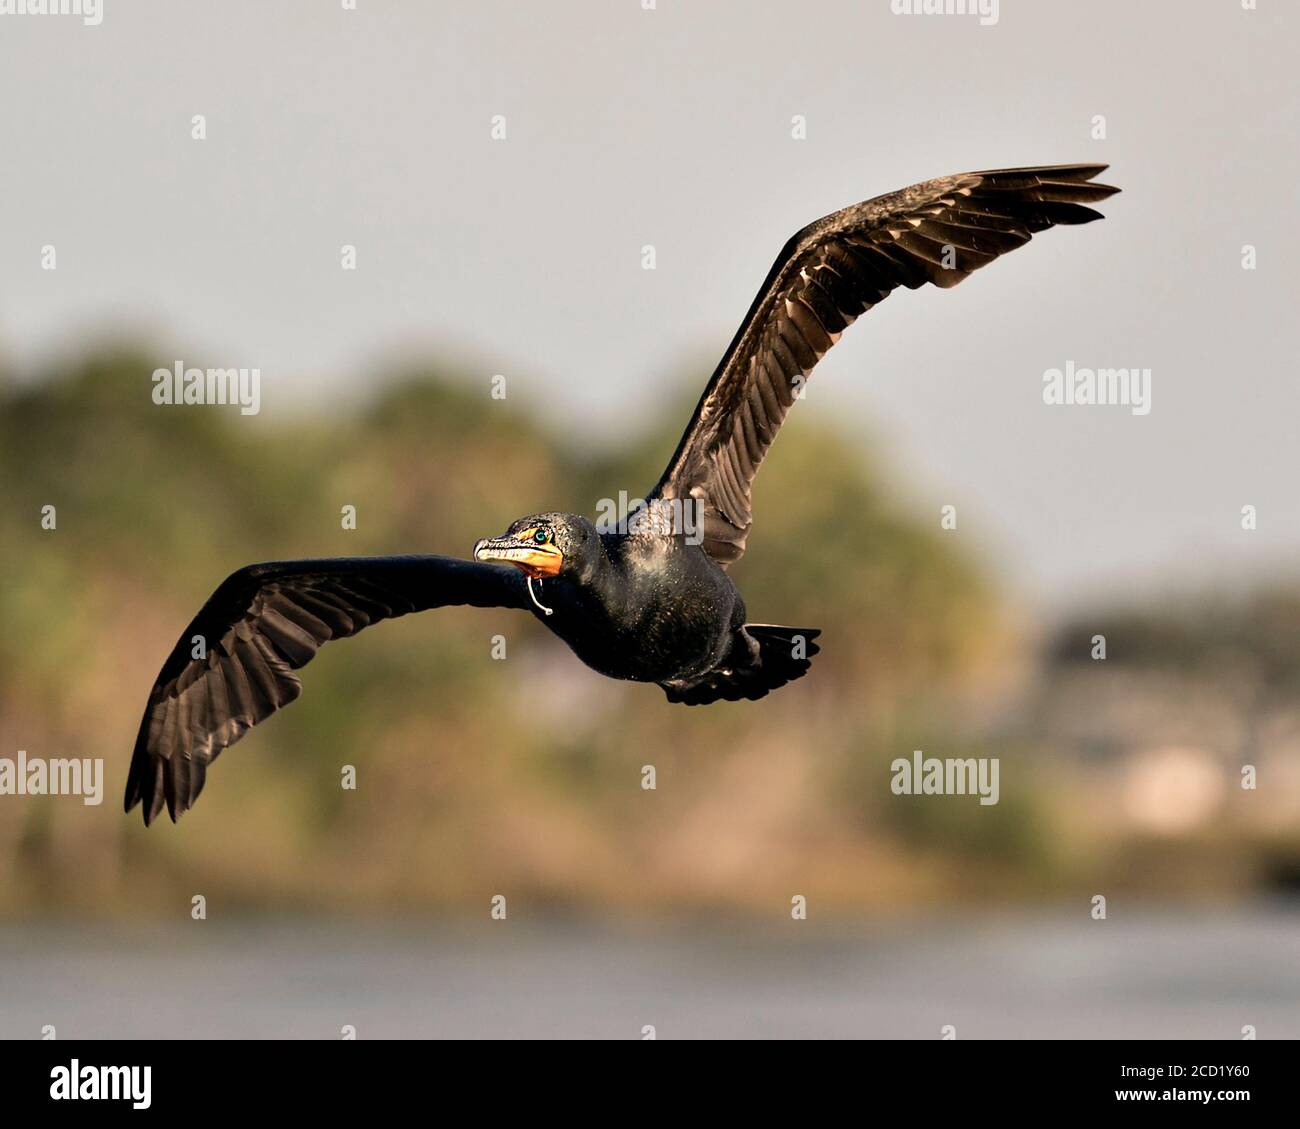 Cormorant bird flying with a fish hook caught in its beak with a blur background in its environment and habitat. Stock Photo